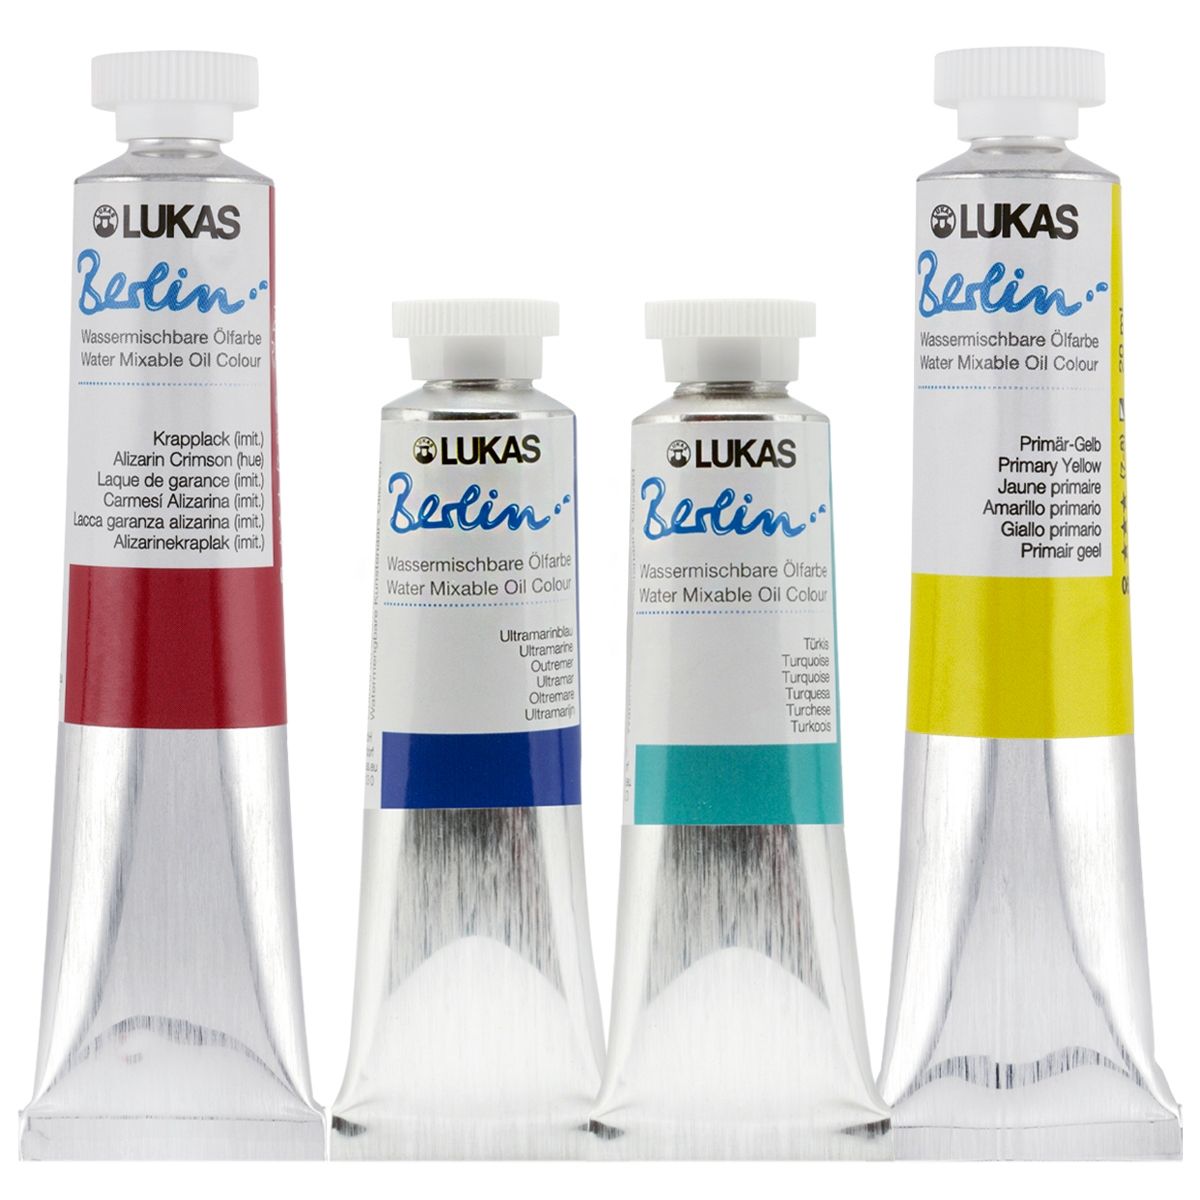 LUKAS Berlin Artist Water Mixable Oil Paints & Sets